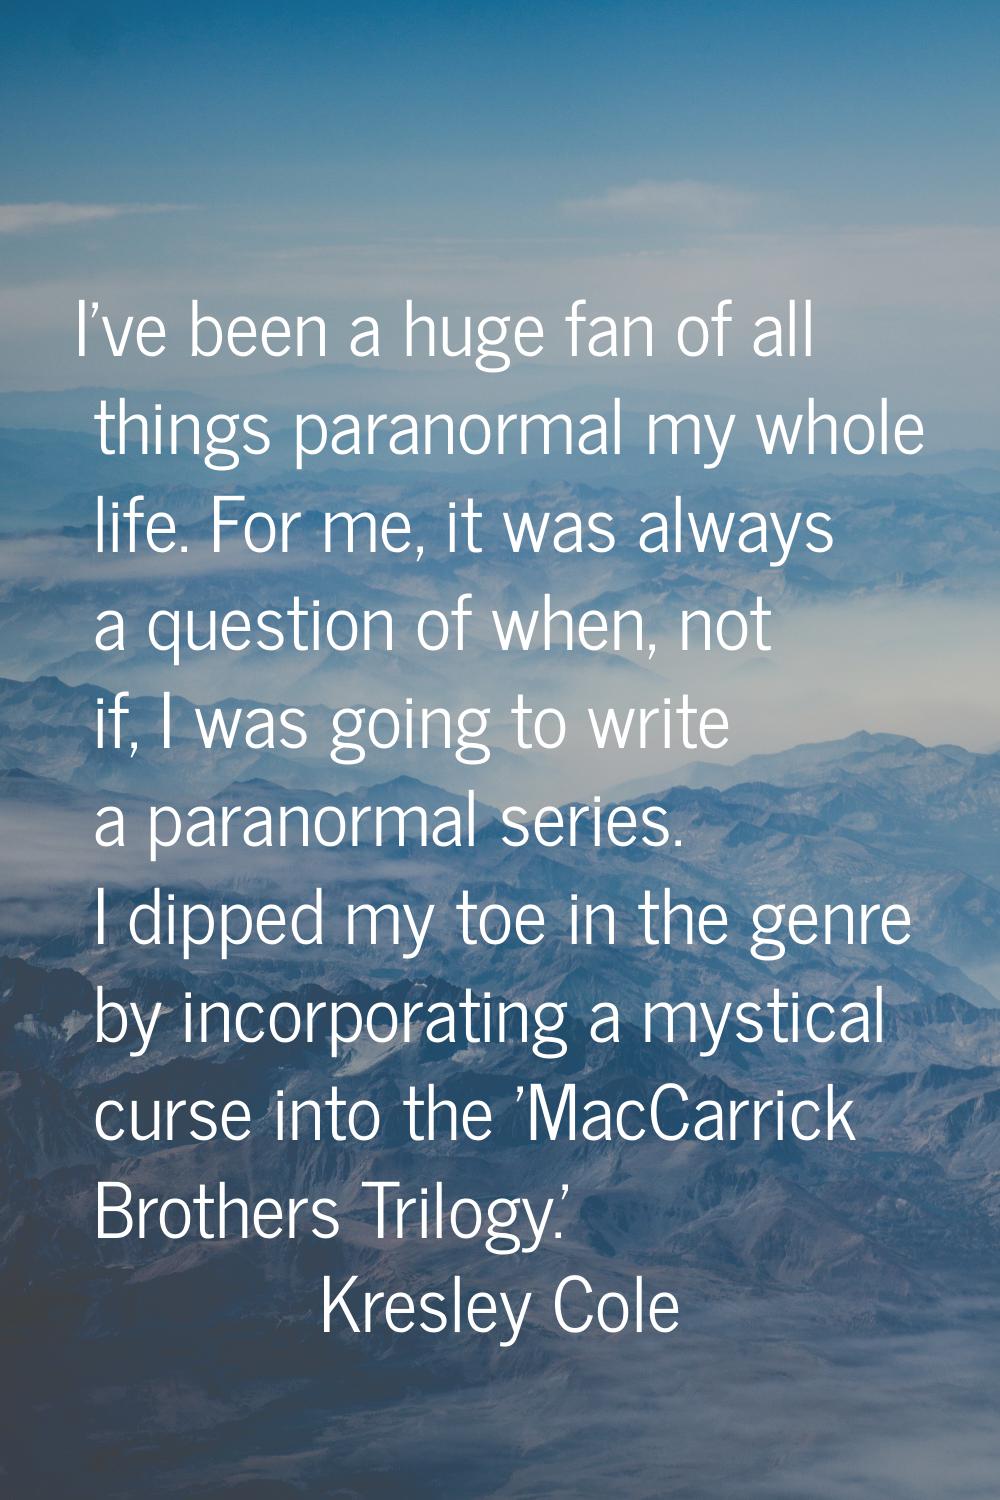 I've been a huge fan of all things paranormal my whole life. For me, it was always a question of wh